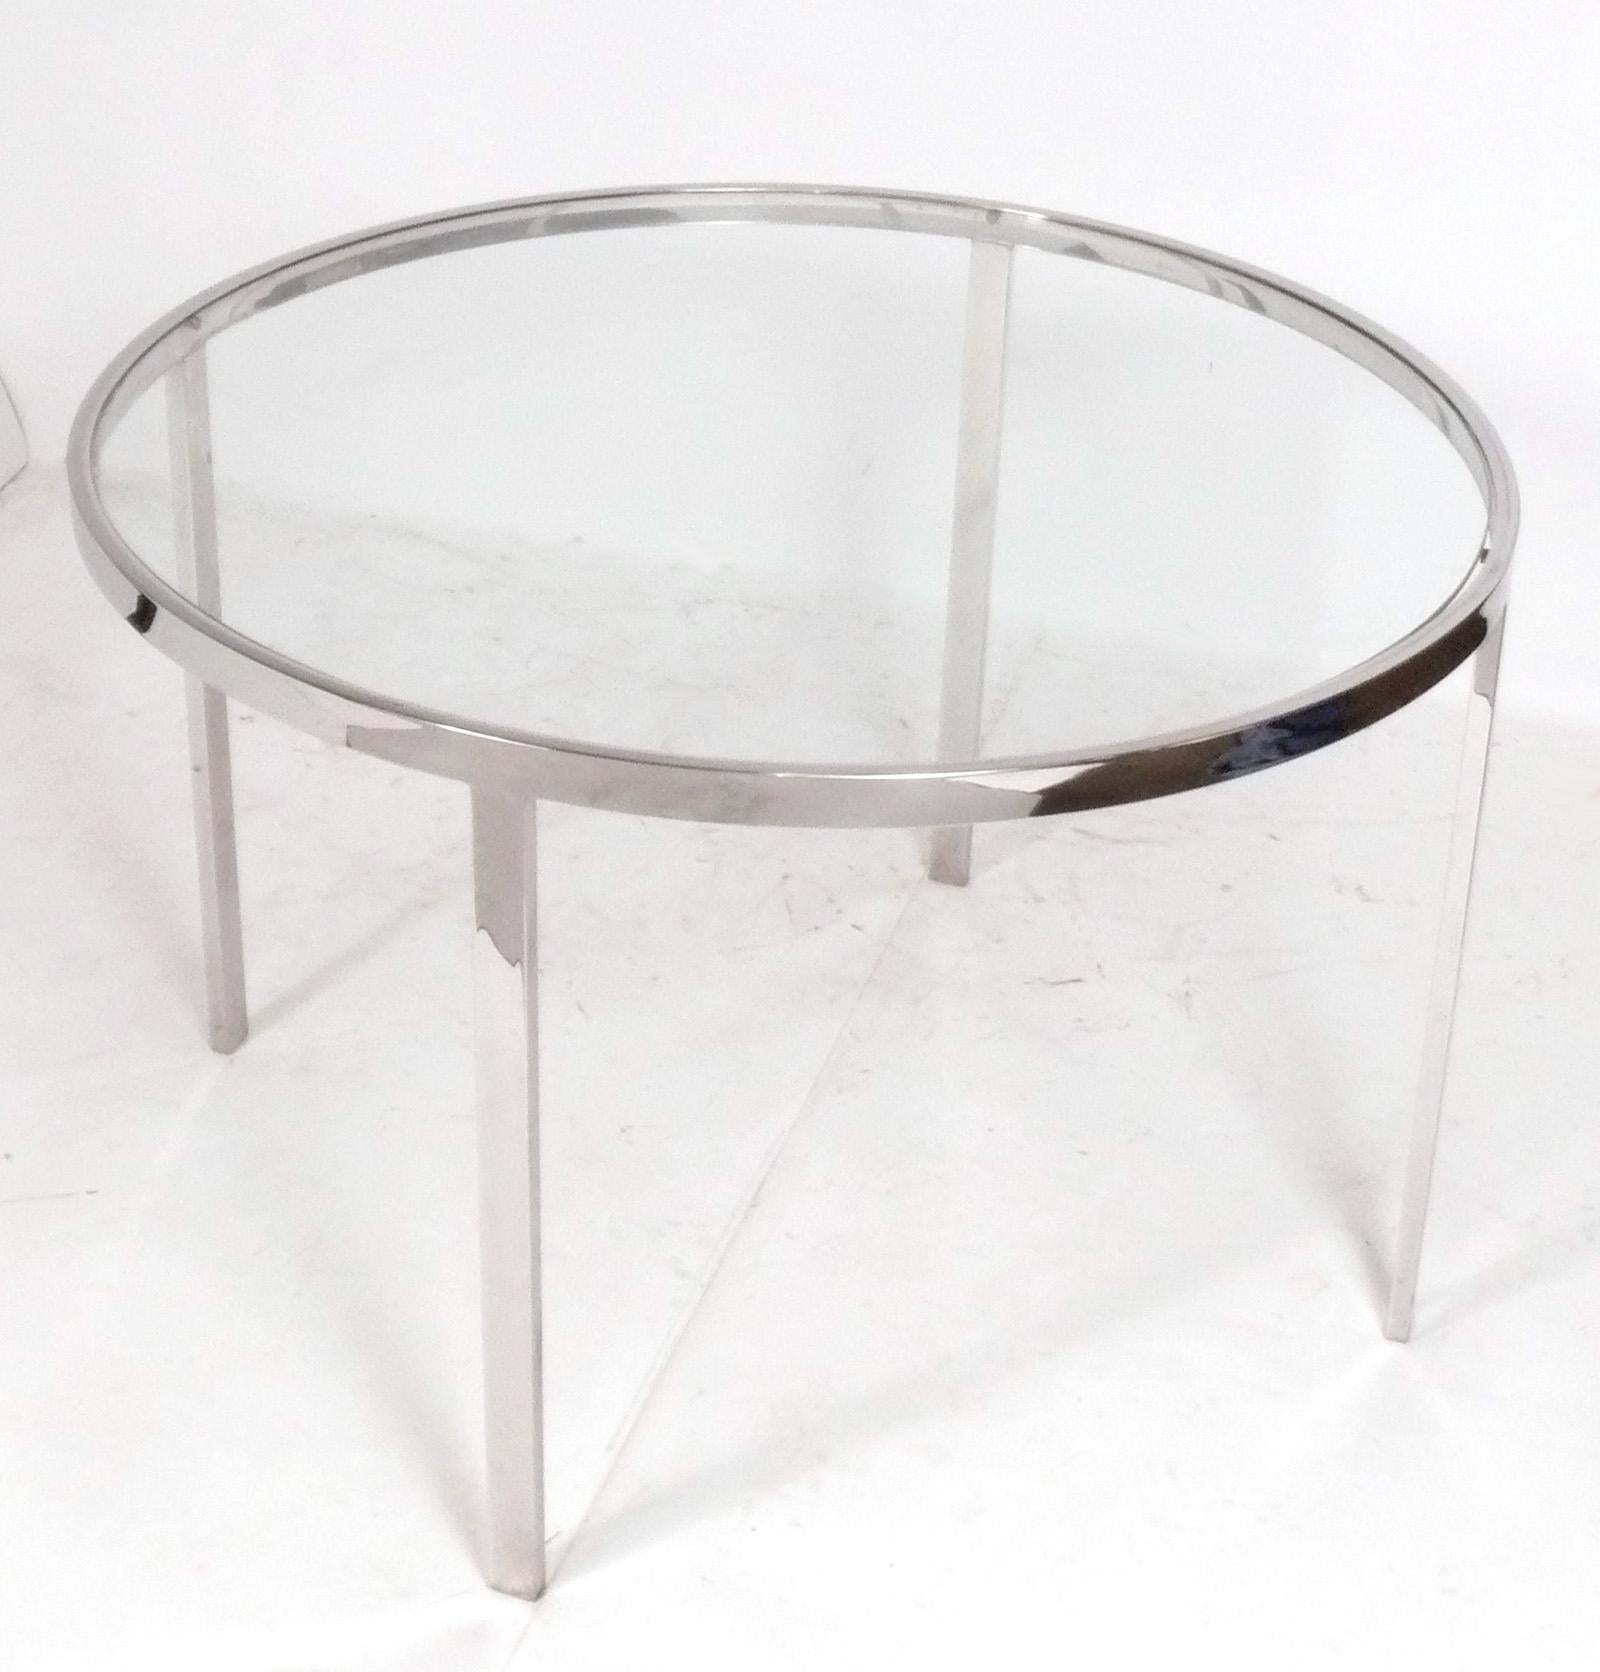 Clean Lined Chrome Mid Century Dining Table, designed by Milo Baughman for DIA (Design Institute America), American, circa 1980s.  